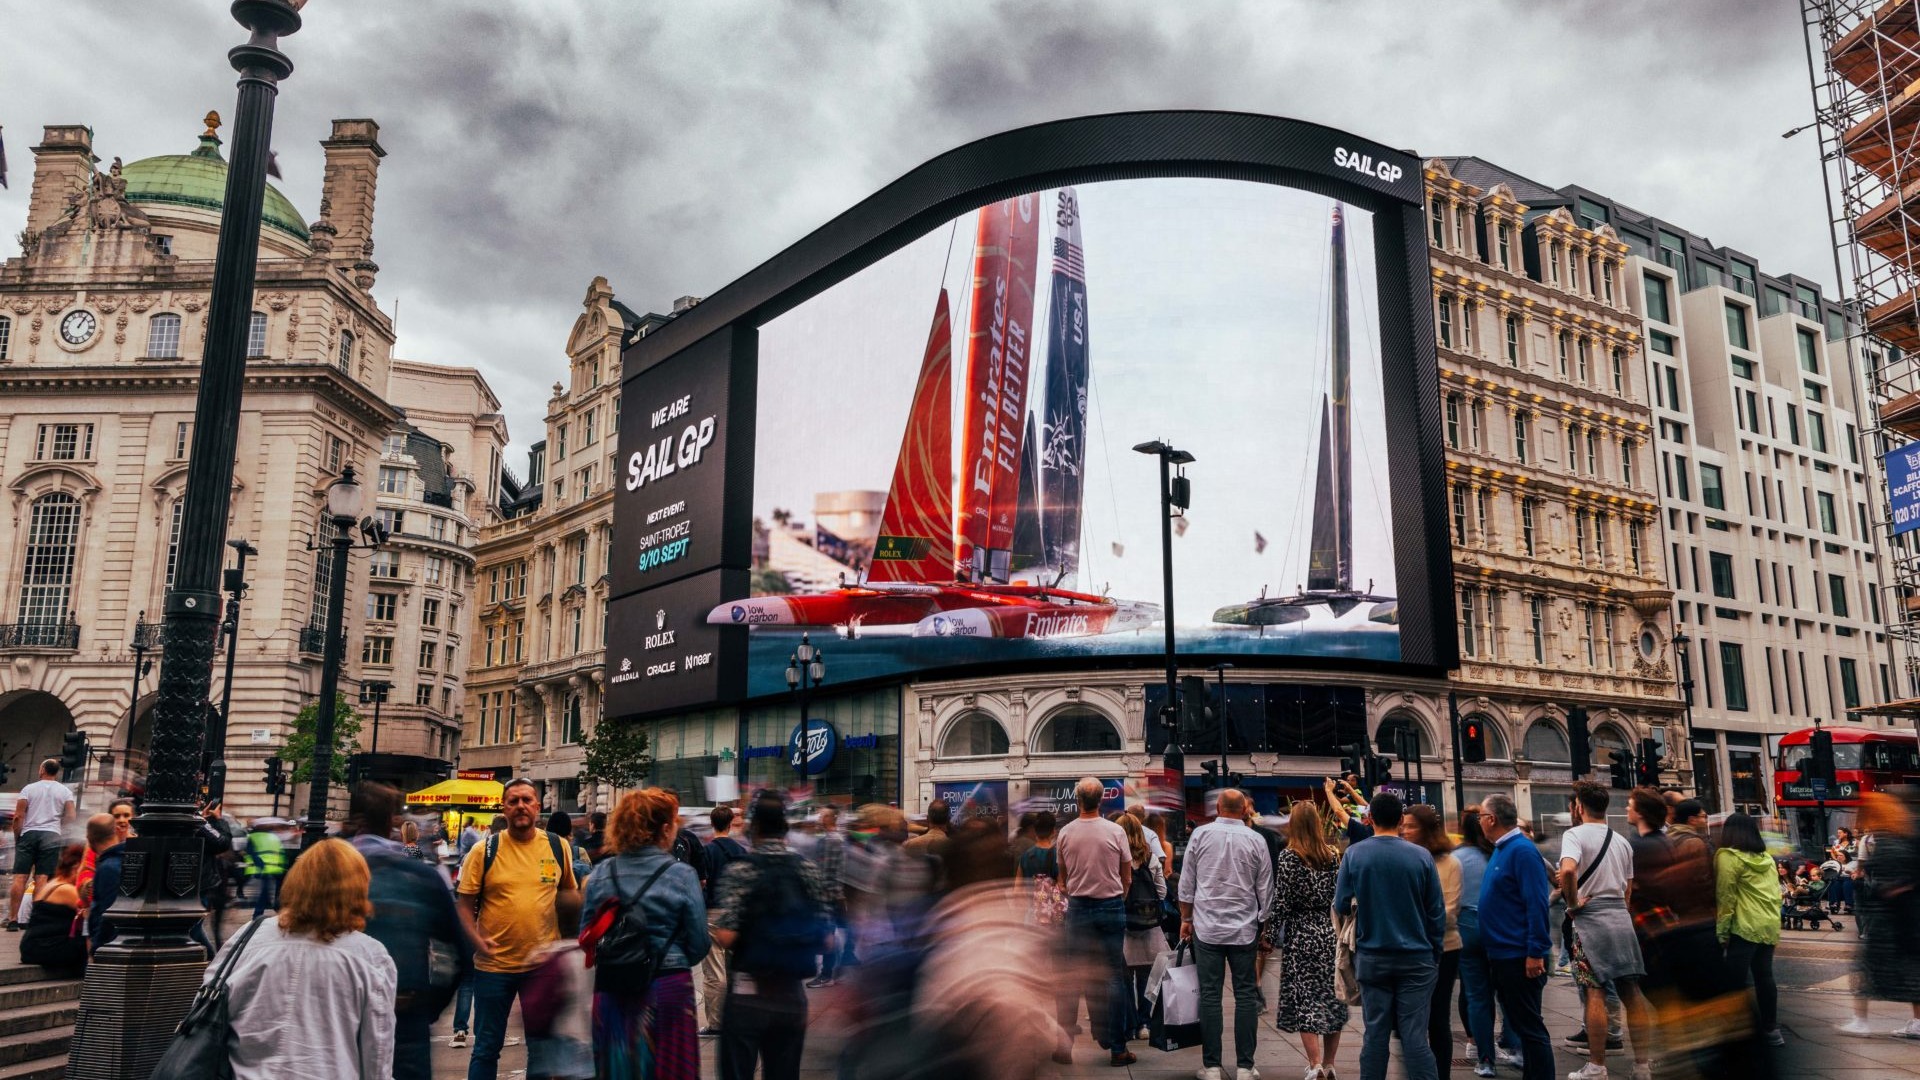 Season 4 // Public watch SailGP marketing campaign in Piccadilly Circus